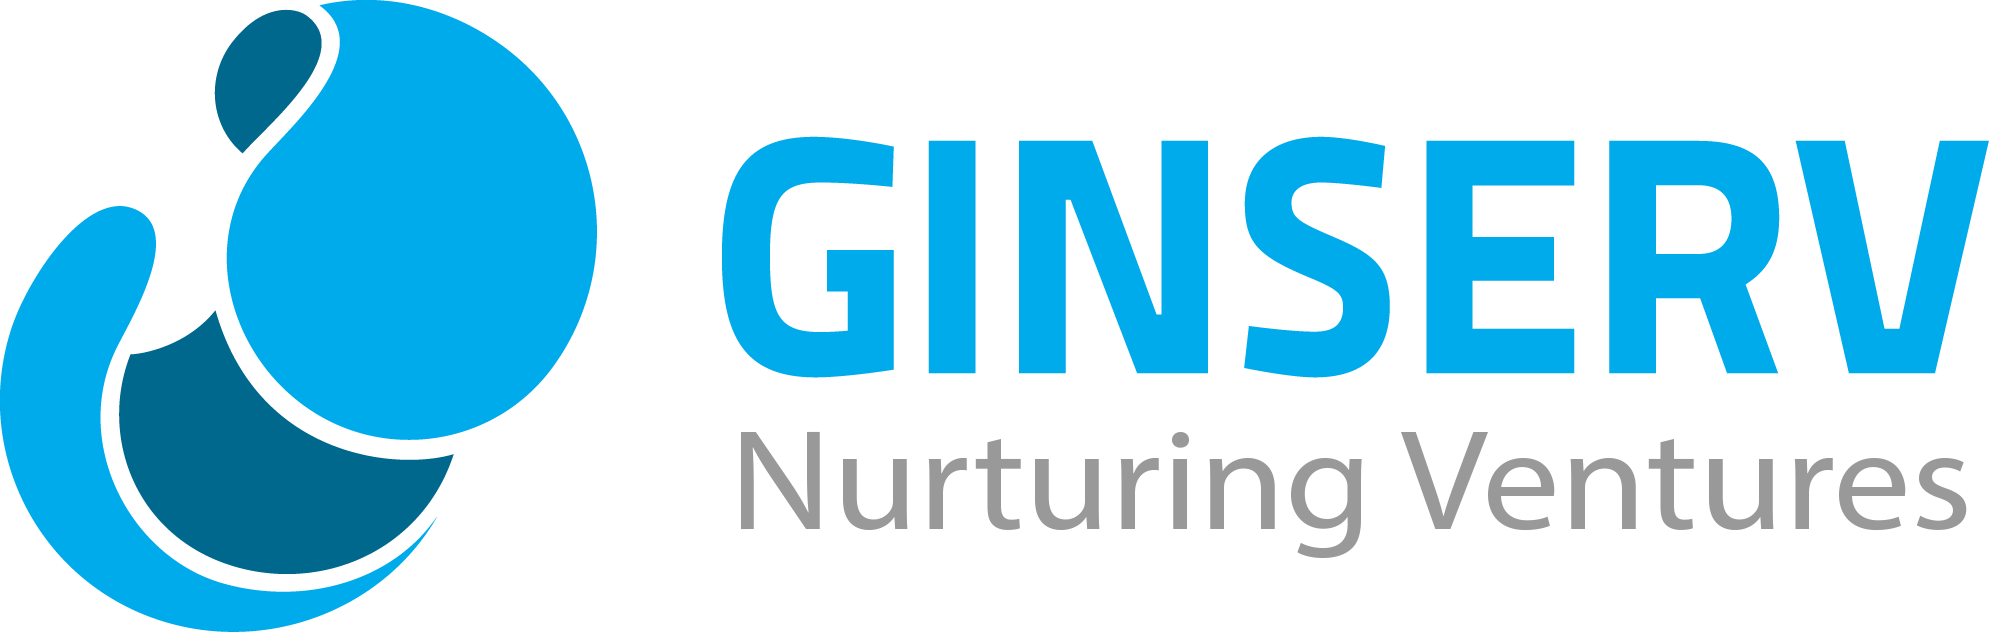 About Ginserv - Support organizations for Small business in Bangalore